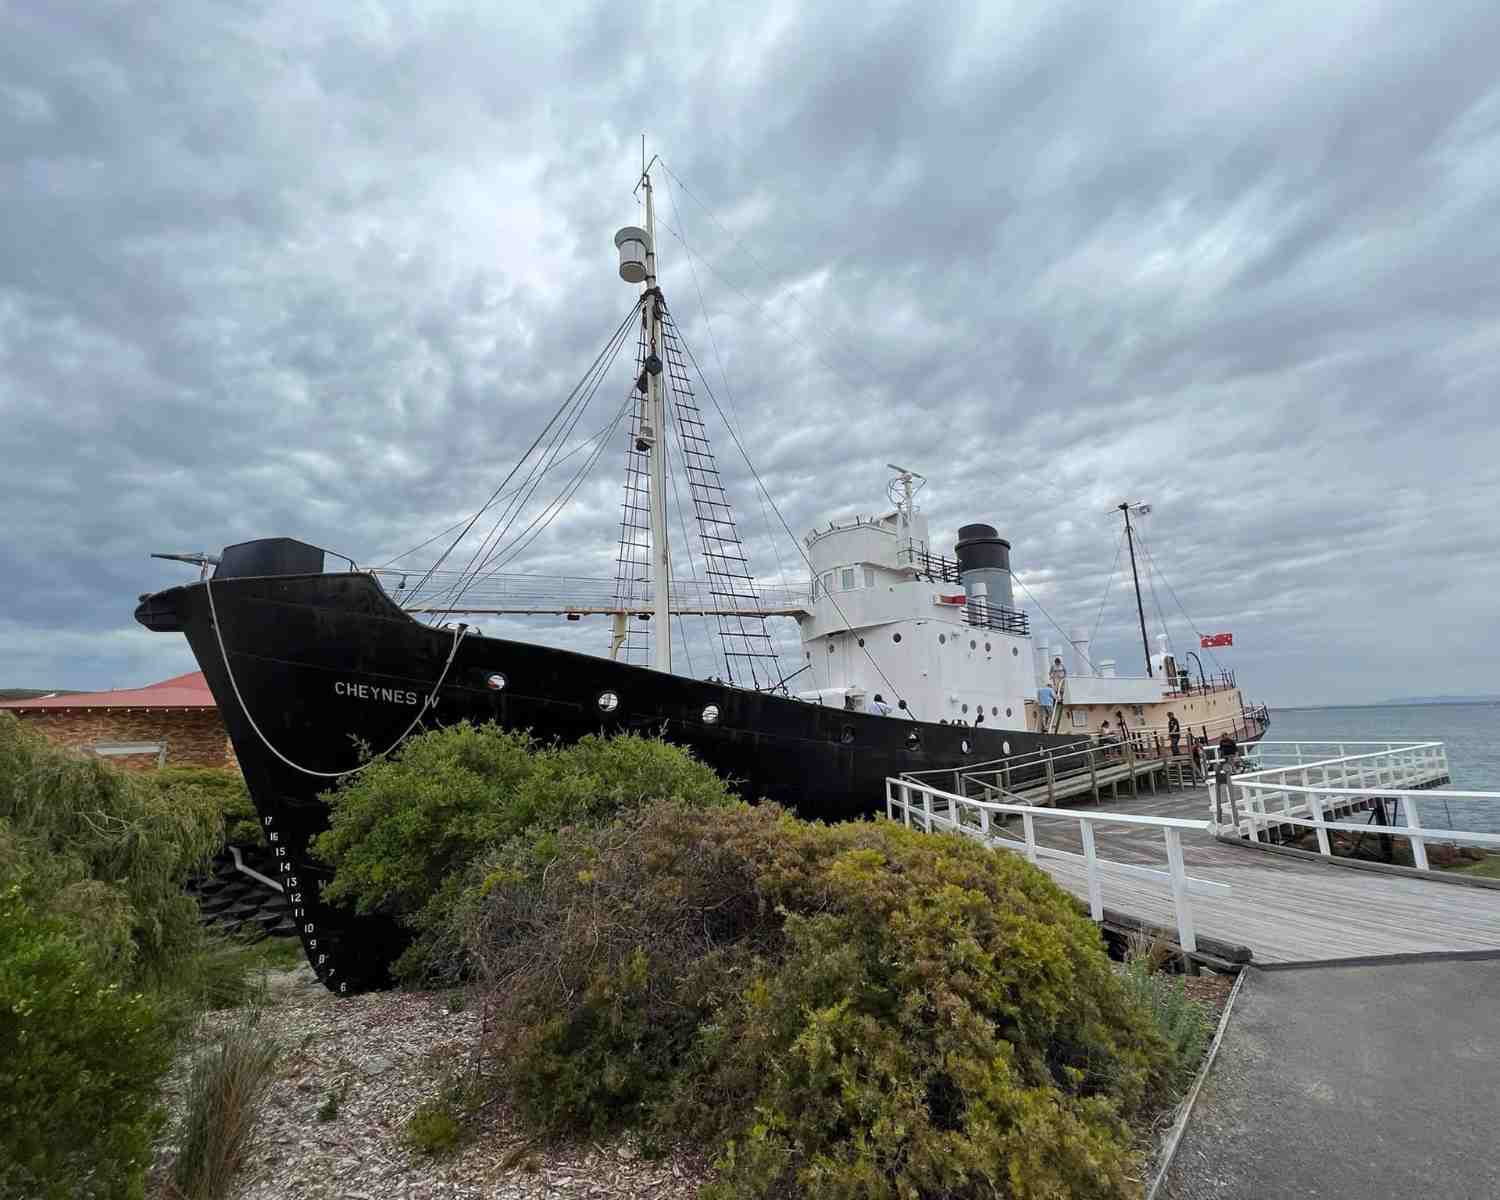 The Visit Albany's Historic Whaling Station 